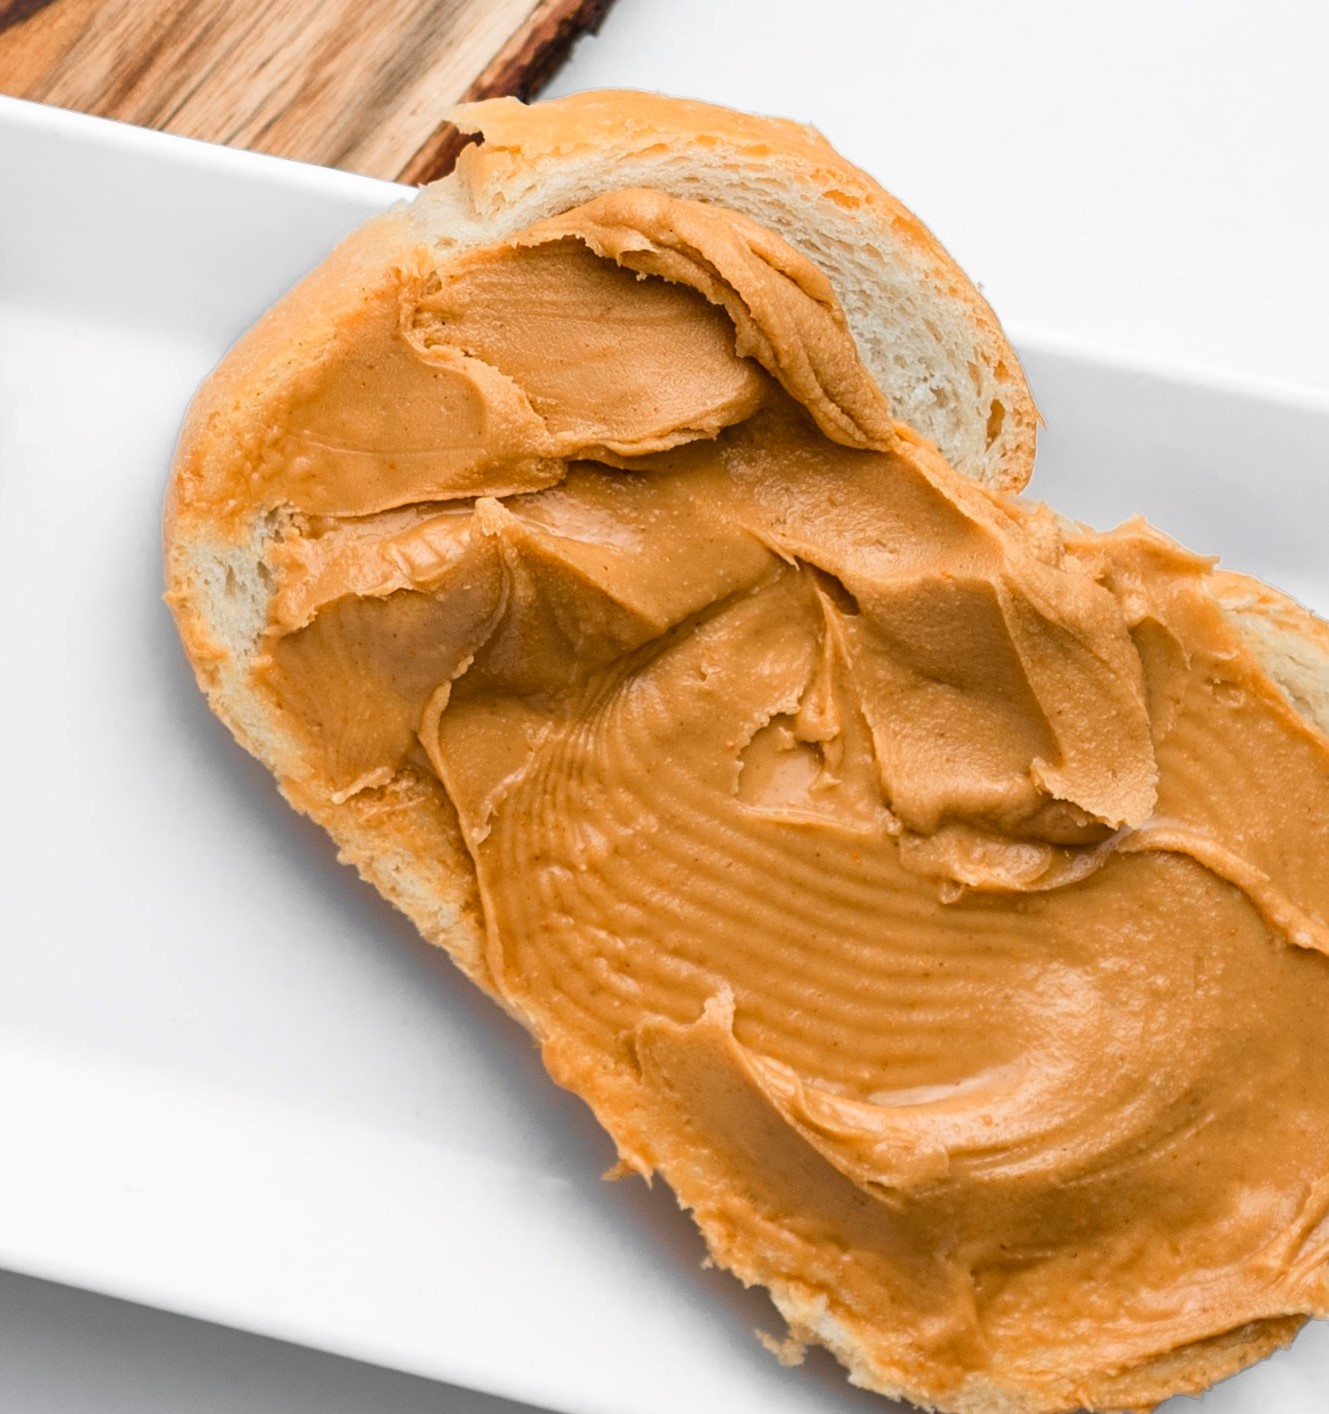 A close-up of peanut butter on a slice of bread on a white plate.